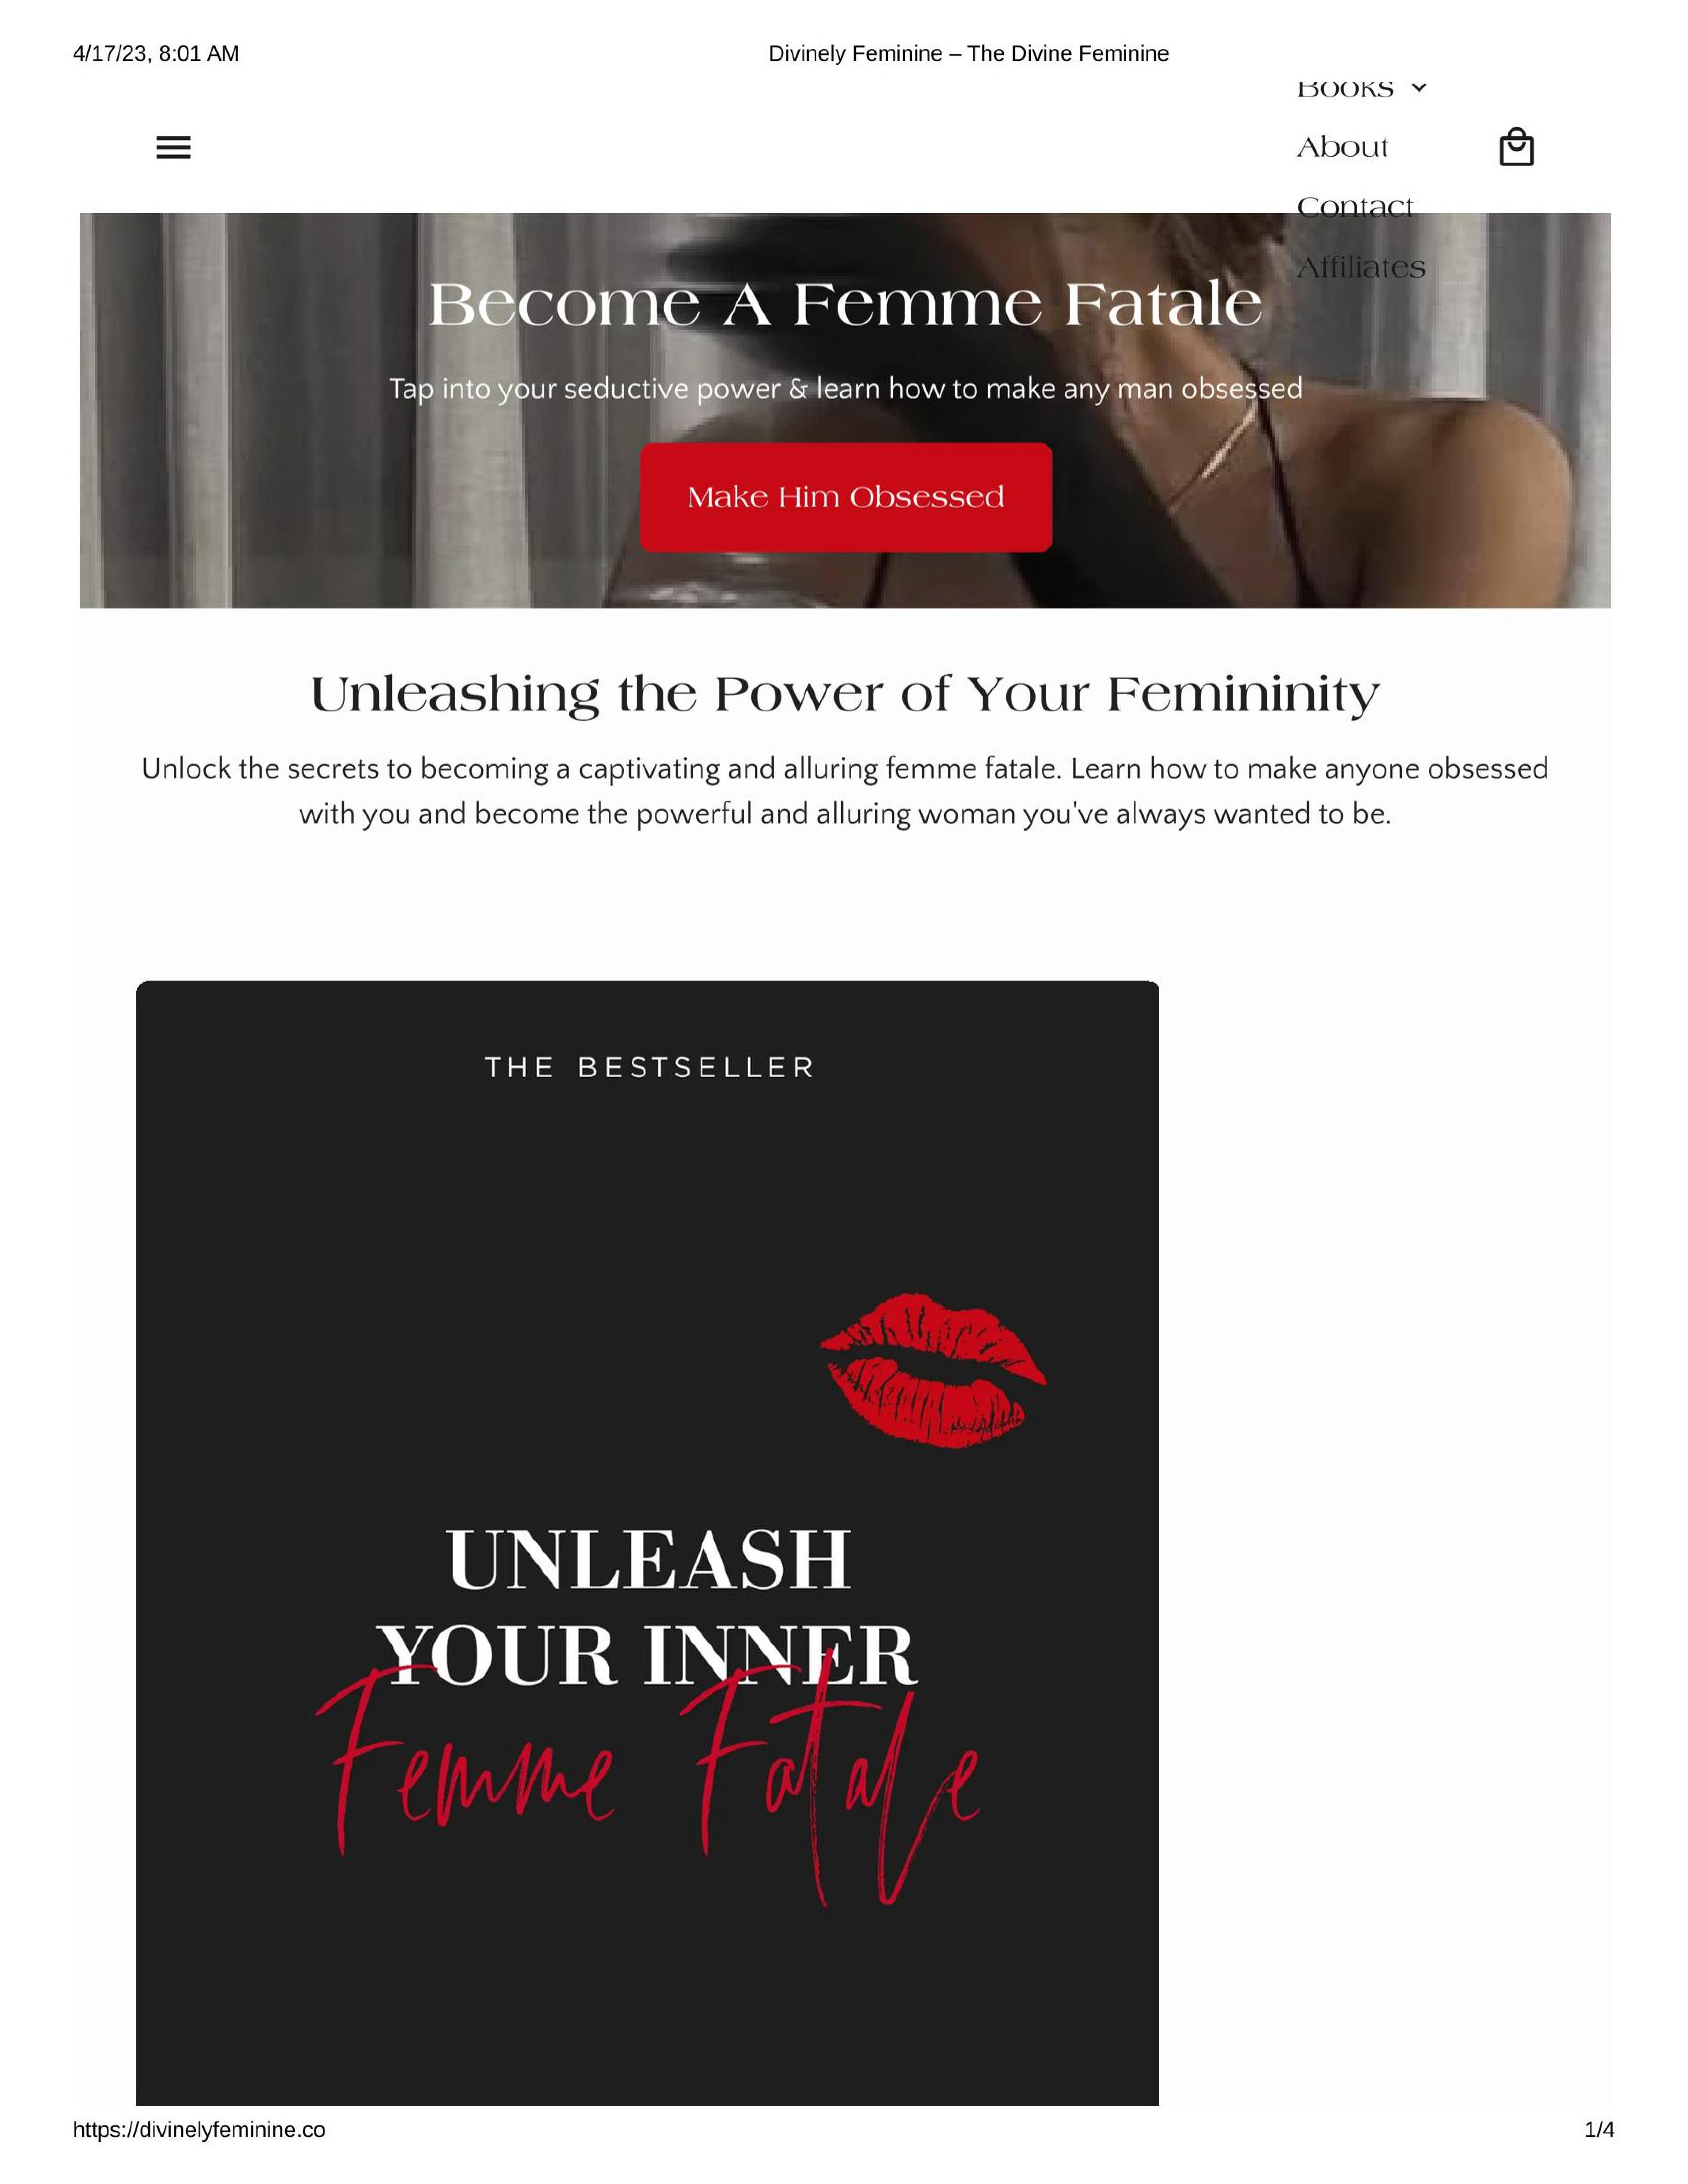 Unleash Your Inner Femme Fatale by Divinely Female